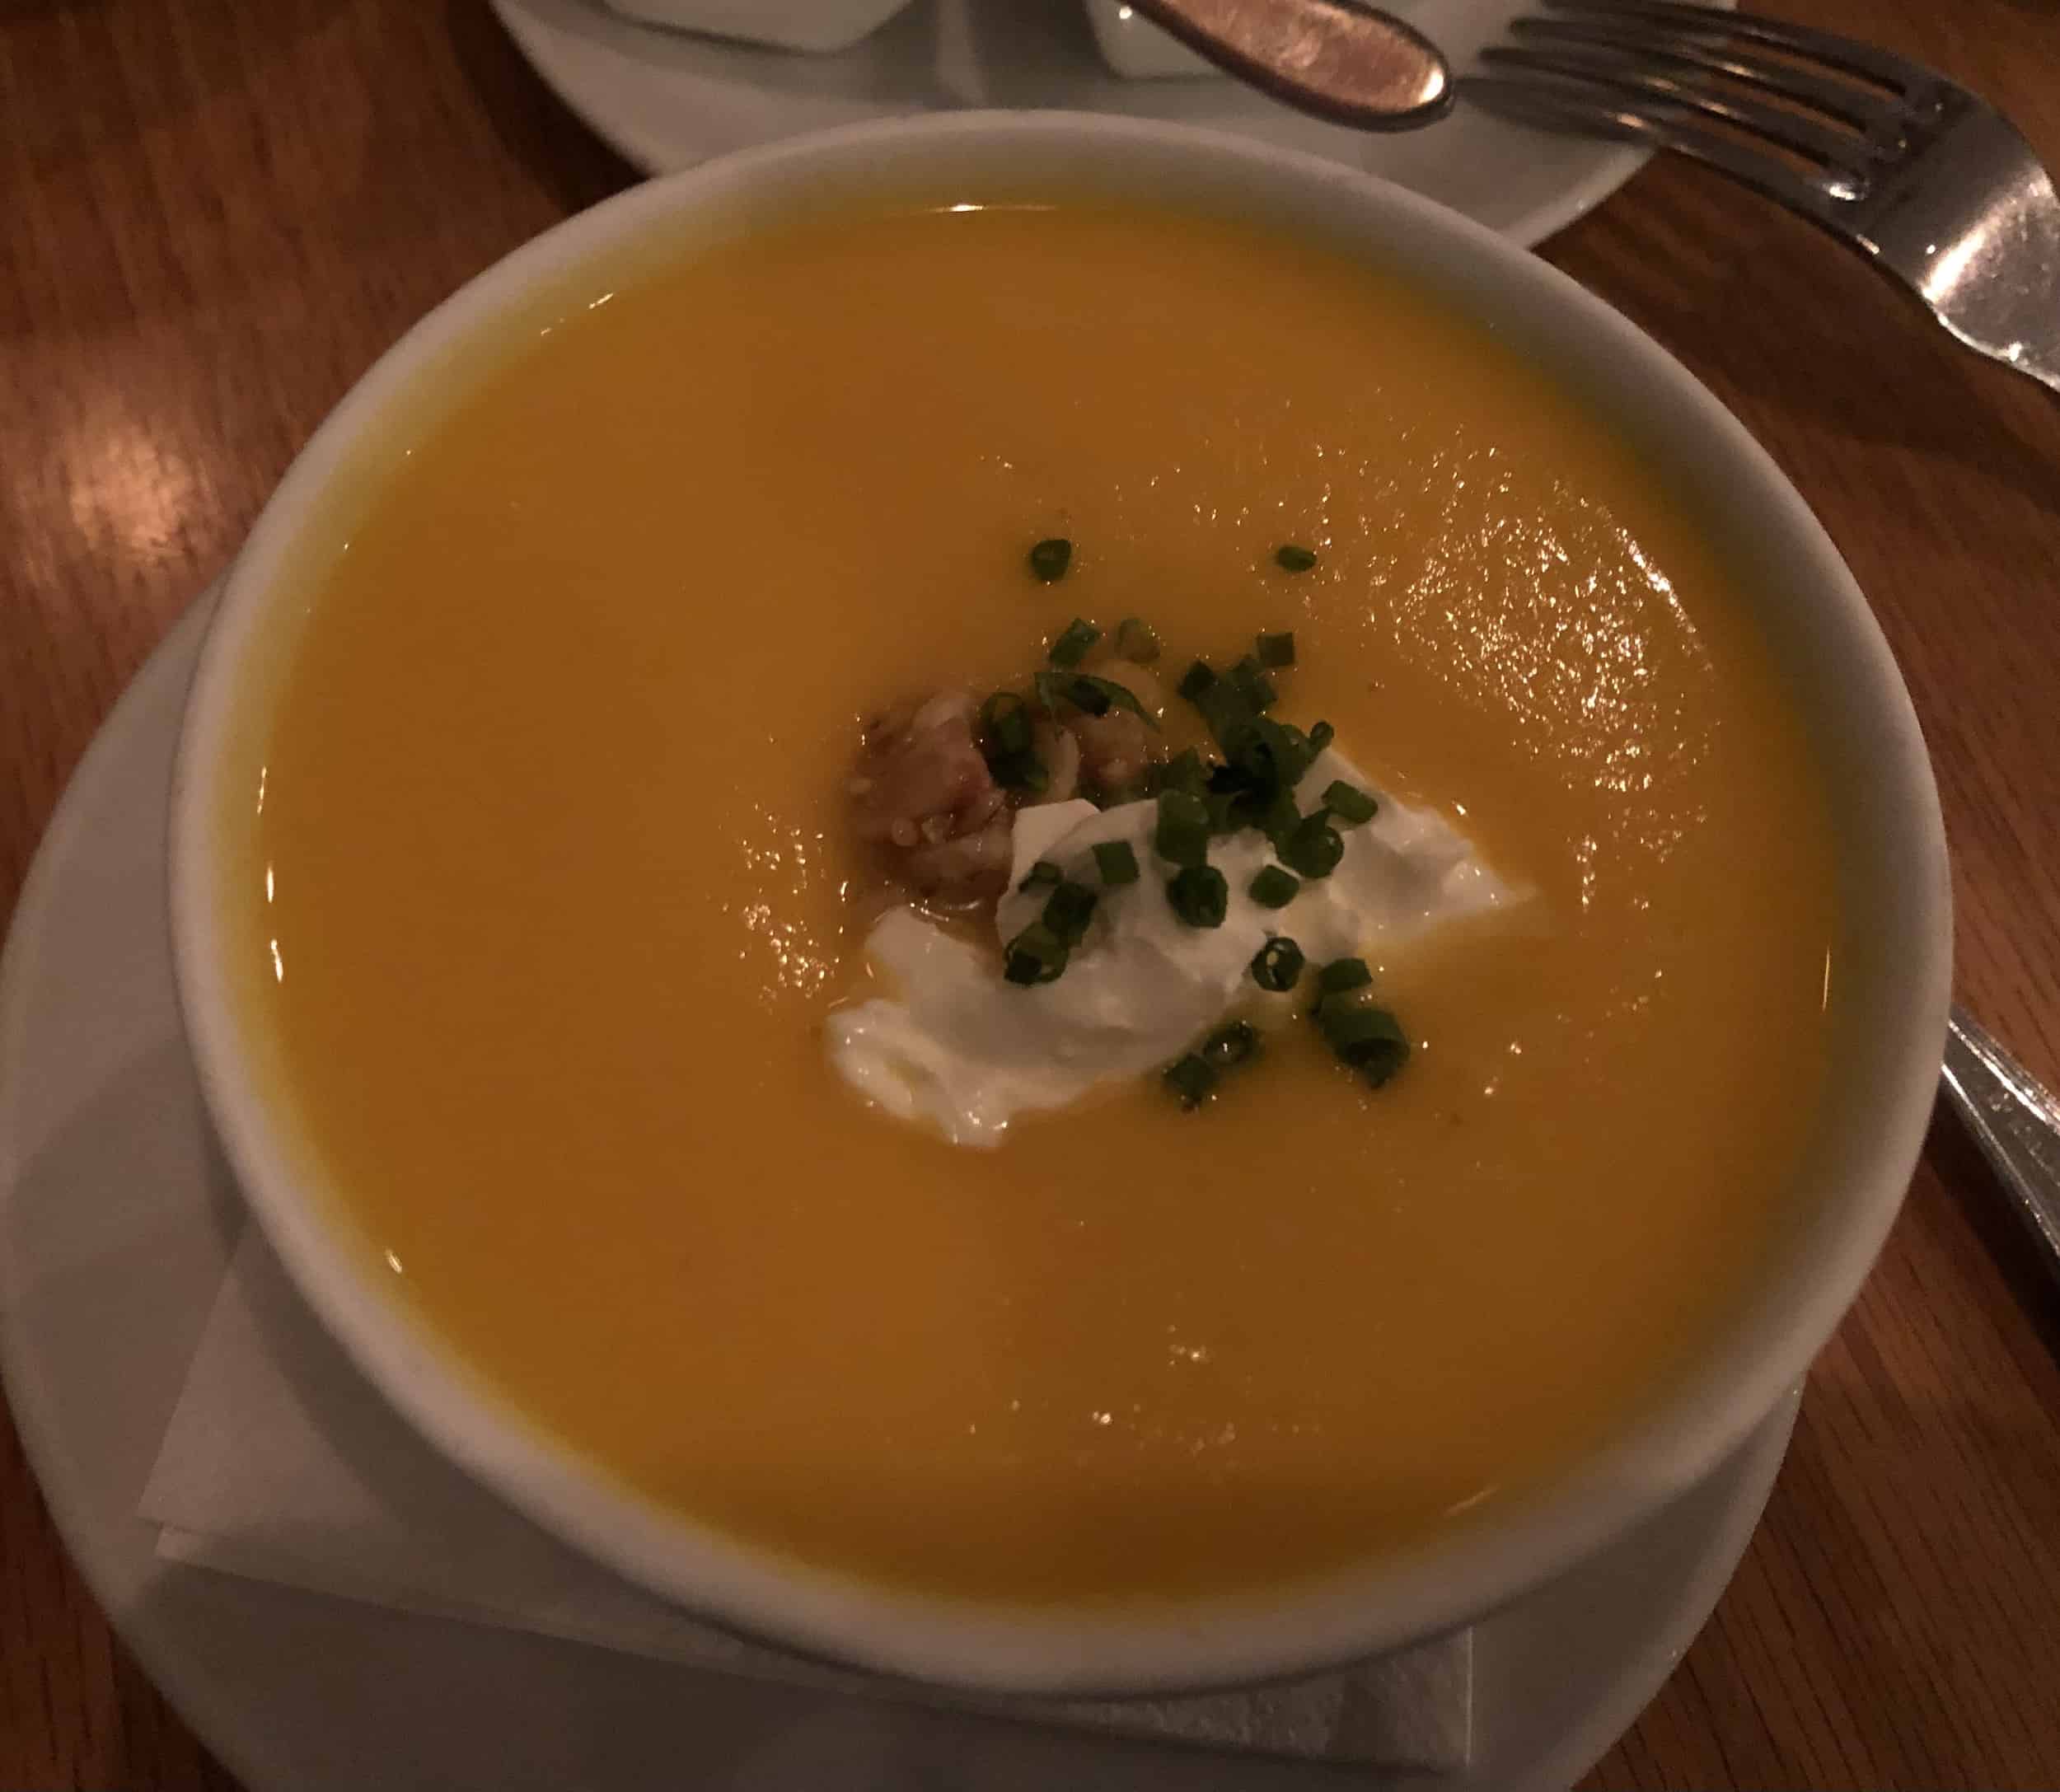 Butternut squash soup at Main + Lincoln